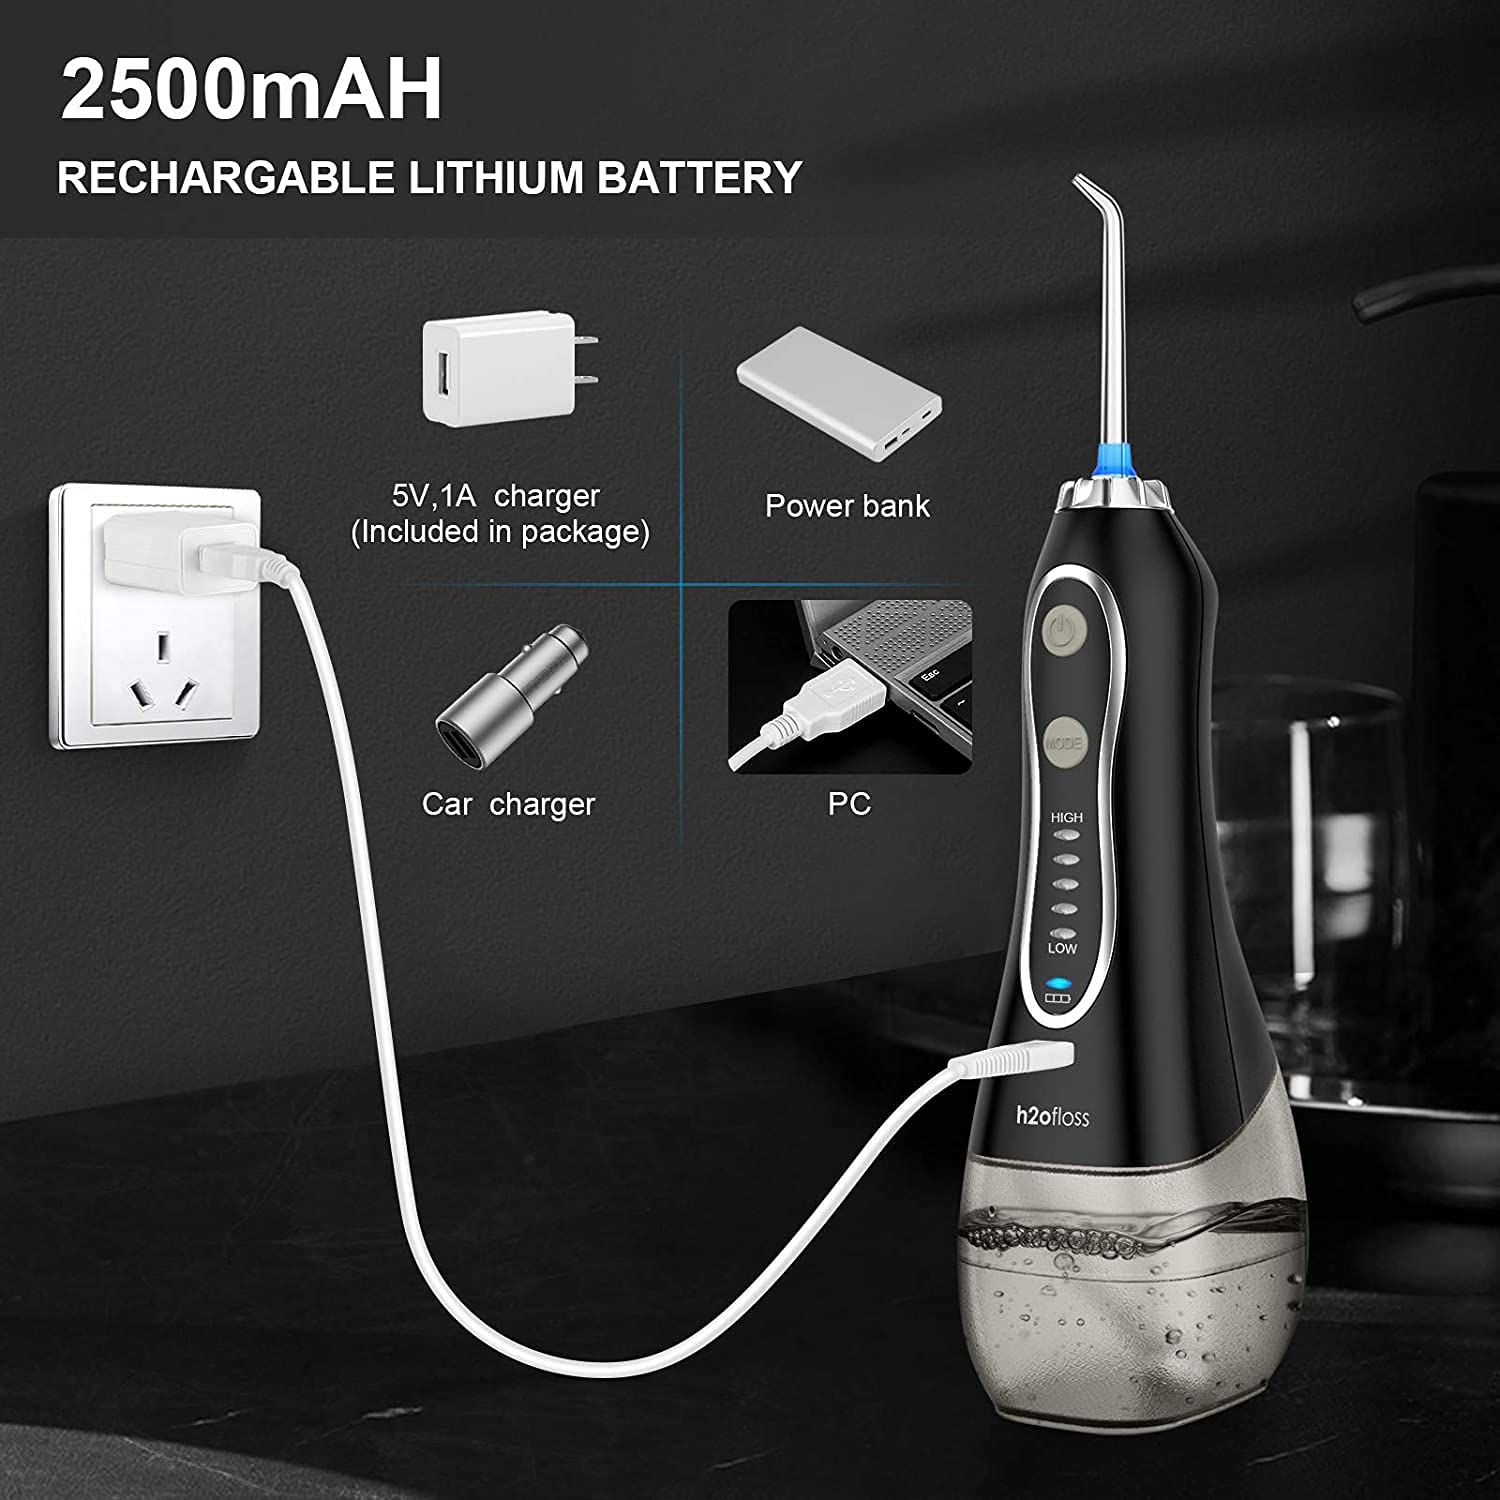 H2ofloss Water Flosser Portable Dental Oral Irrigator with 5 Modes, 6 Replaceable Jet Tips, Rechargeable Waterproof Teeth Cleaner for Home and Travel -300ml Detachable Reservoir (HF-6)